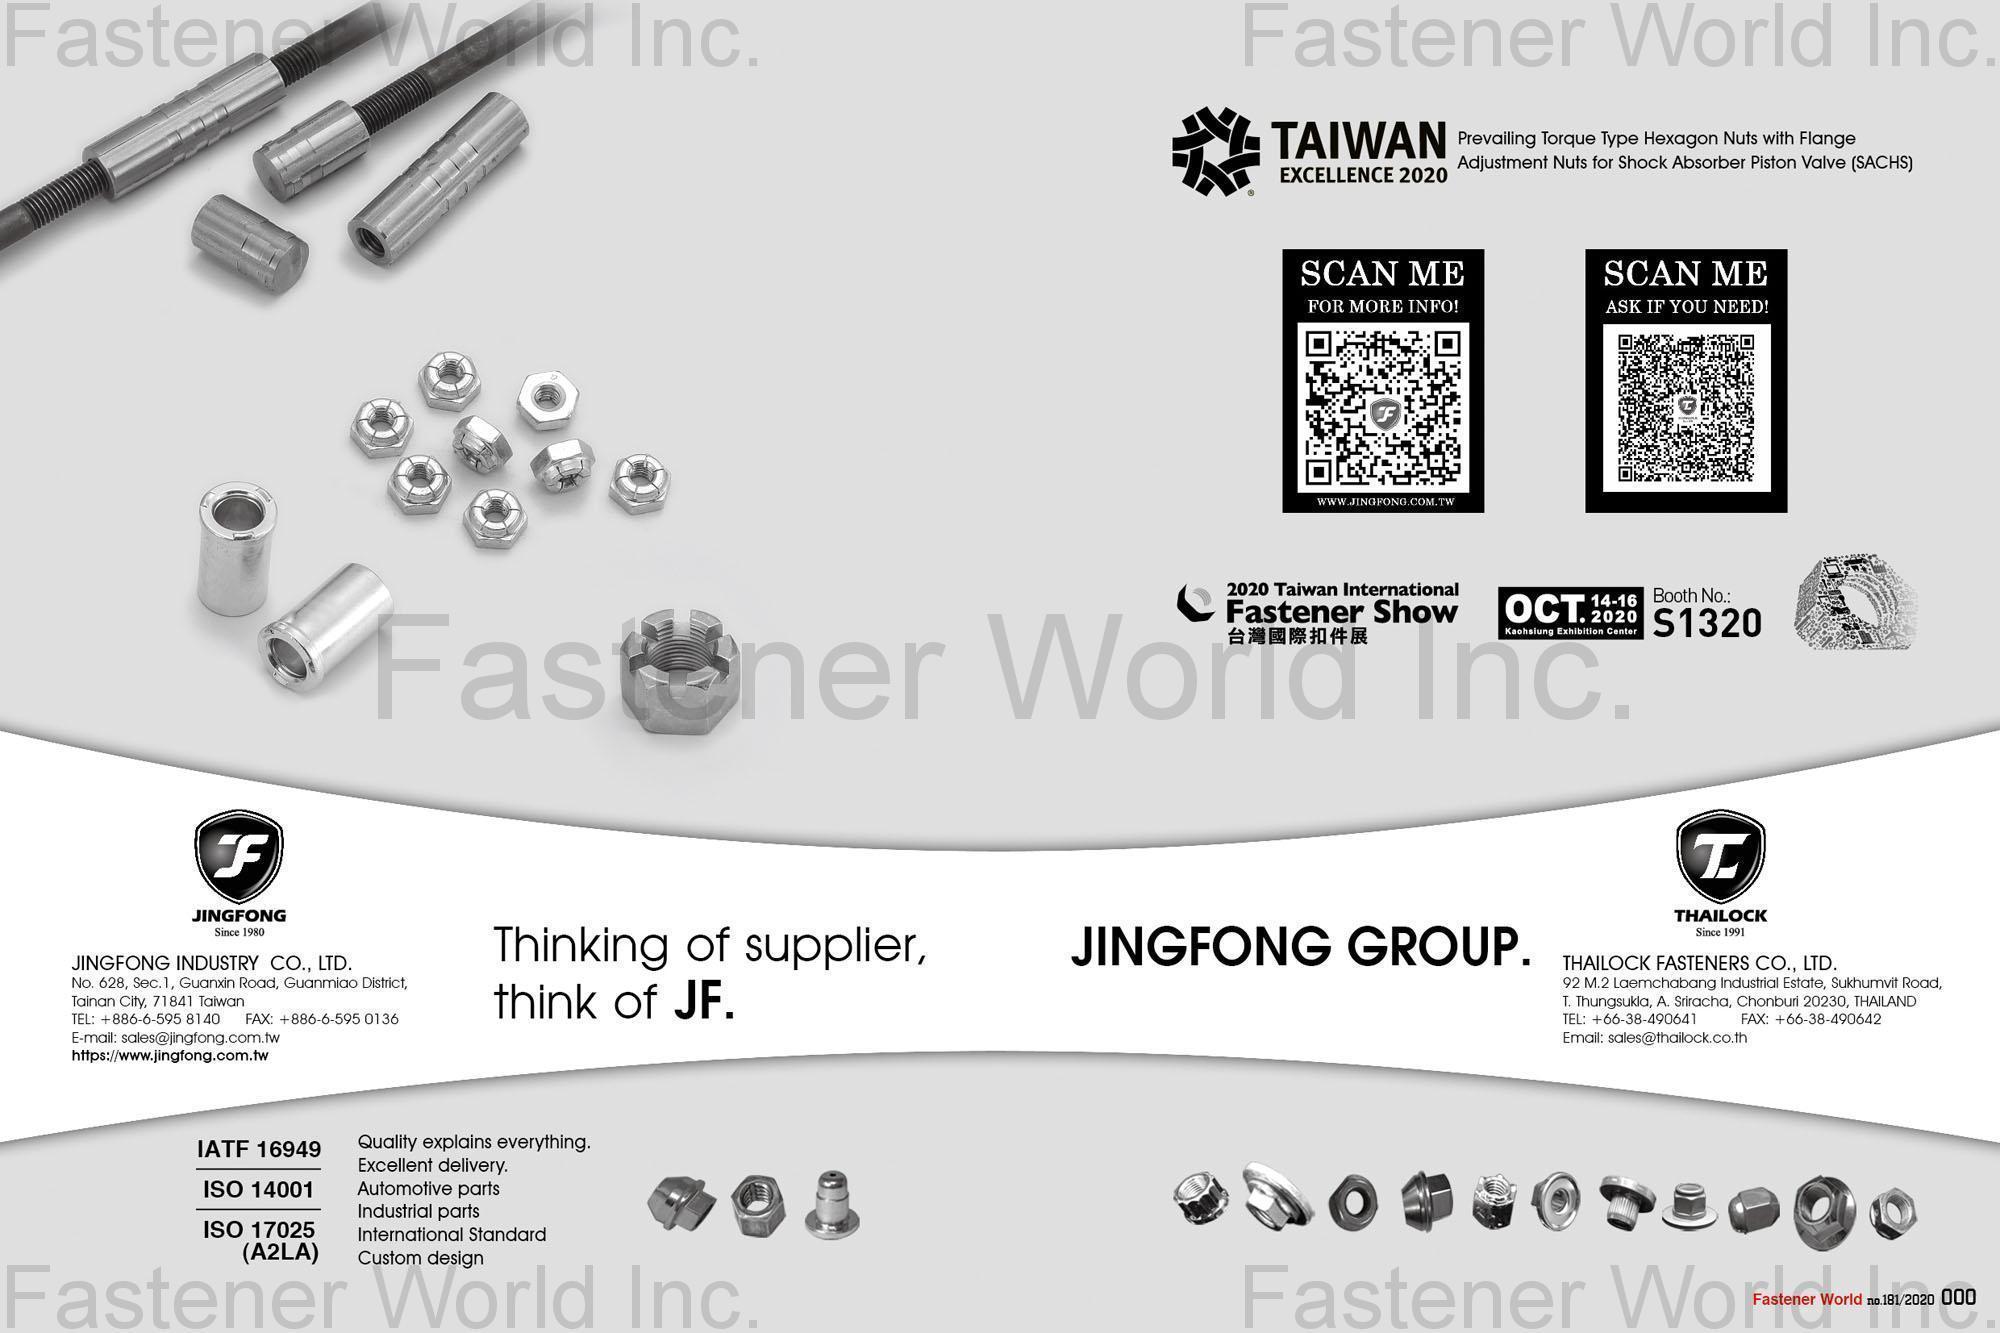 JINGFONG INDUSTRY CO., LTD.  , PREVAILING TORQUE LOCK NUTS, NYLON INSERTED NUTS, ALL METAL NUTS, NYLON PATCH NUTS, FLANGE NUTS, HEX NUTS, WELD NUTS, CONICAL NUTS, WHEEL NUTS, CAP NUTS, SLOT NUTS, SQUARE NUTS, SPECIAL NUTS , U Nuts